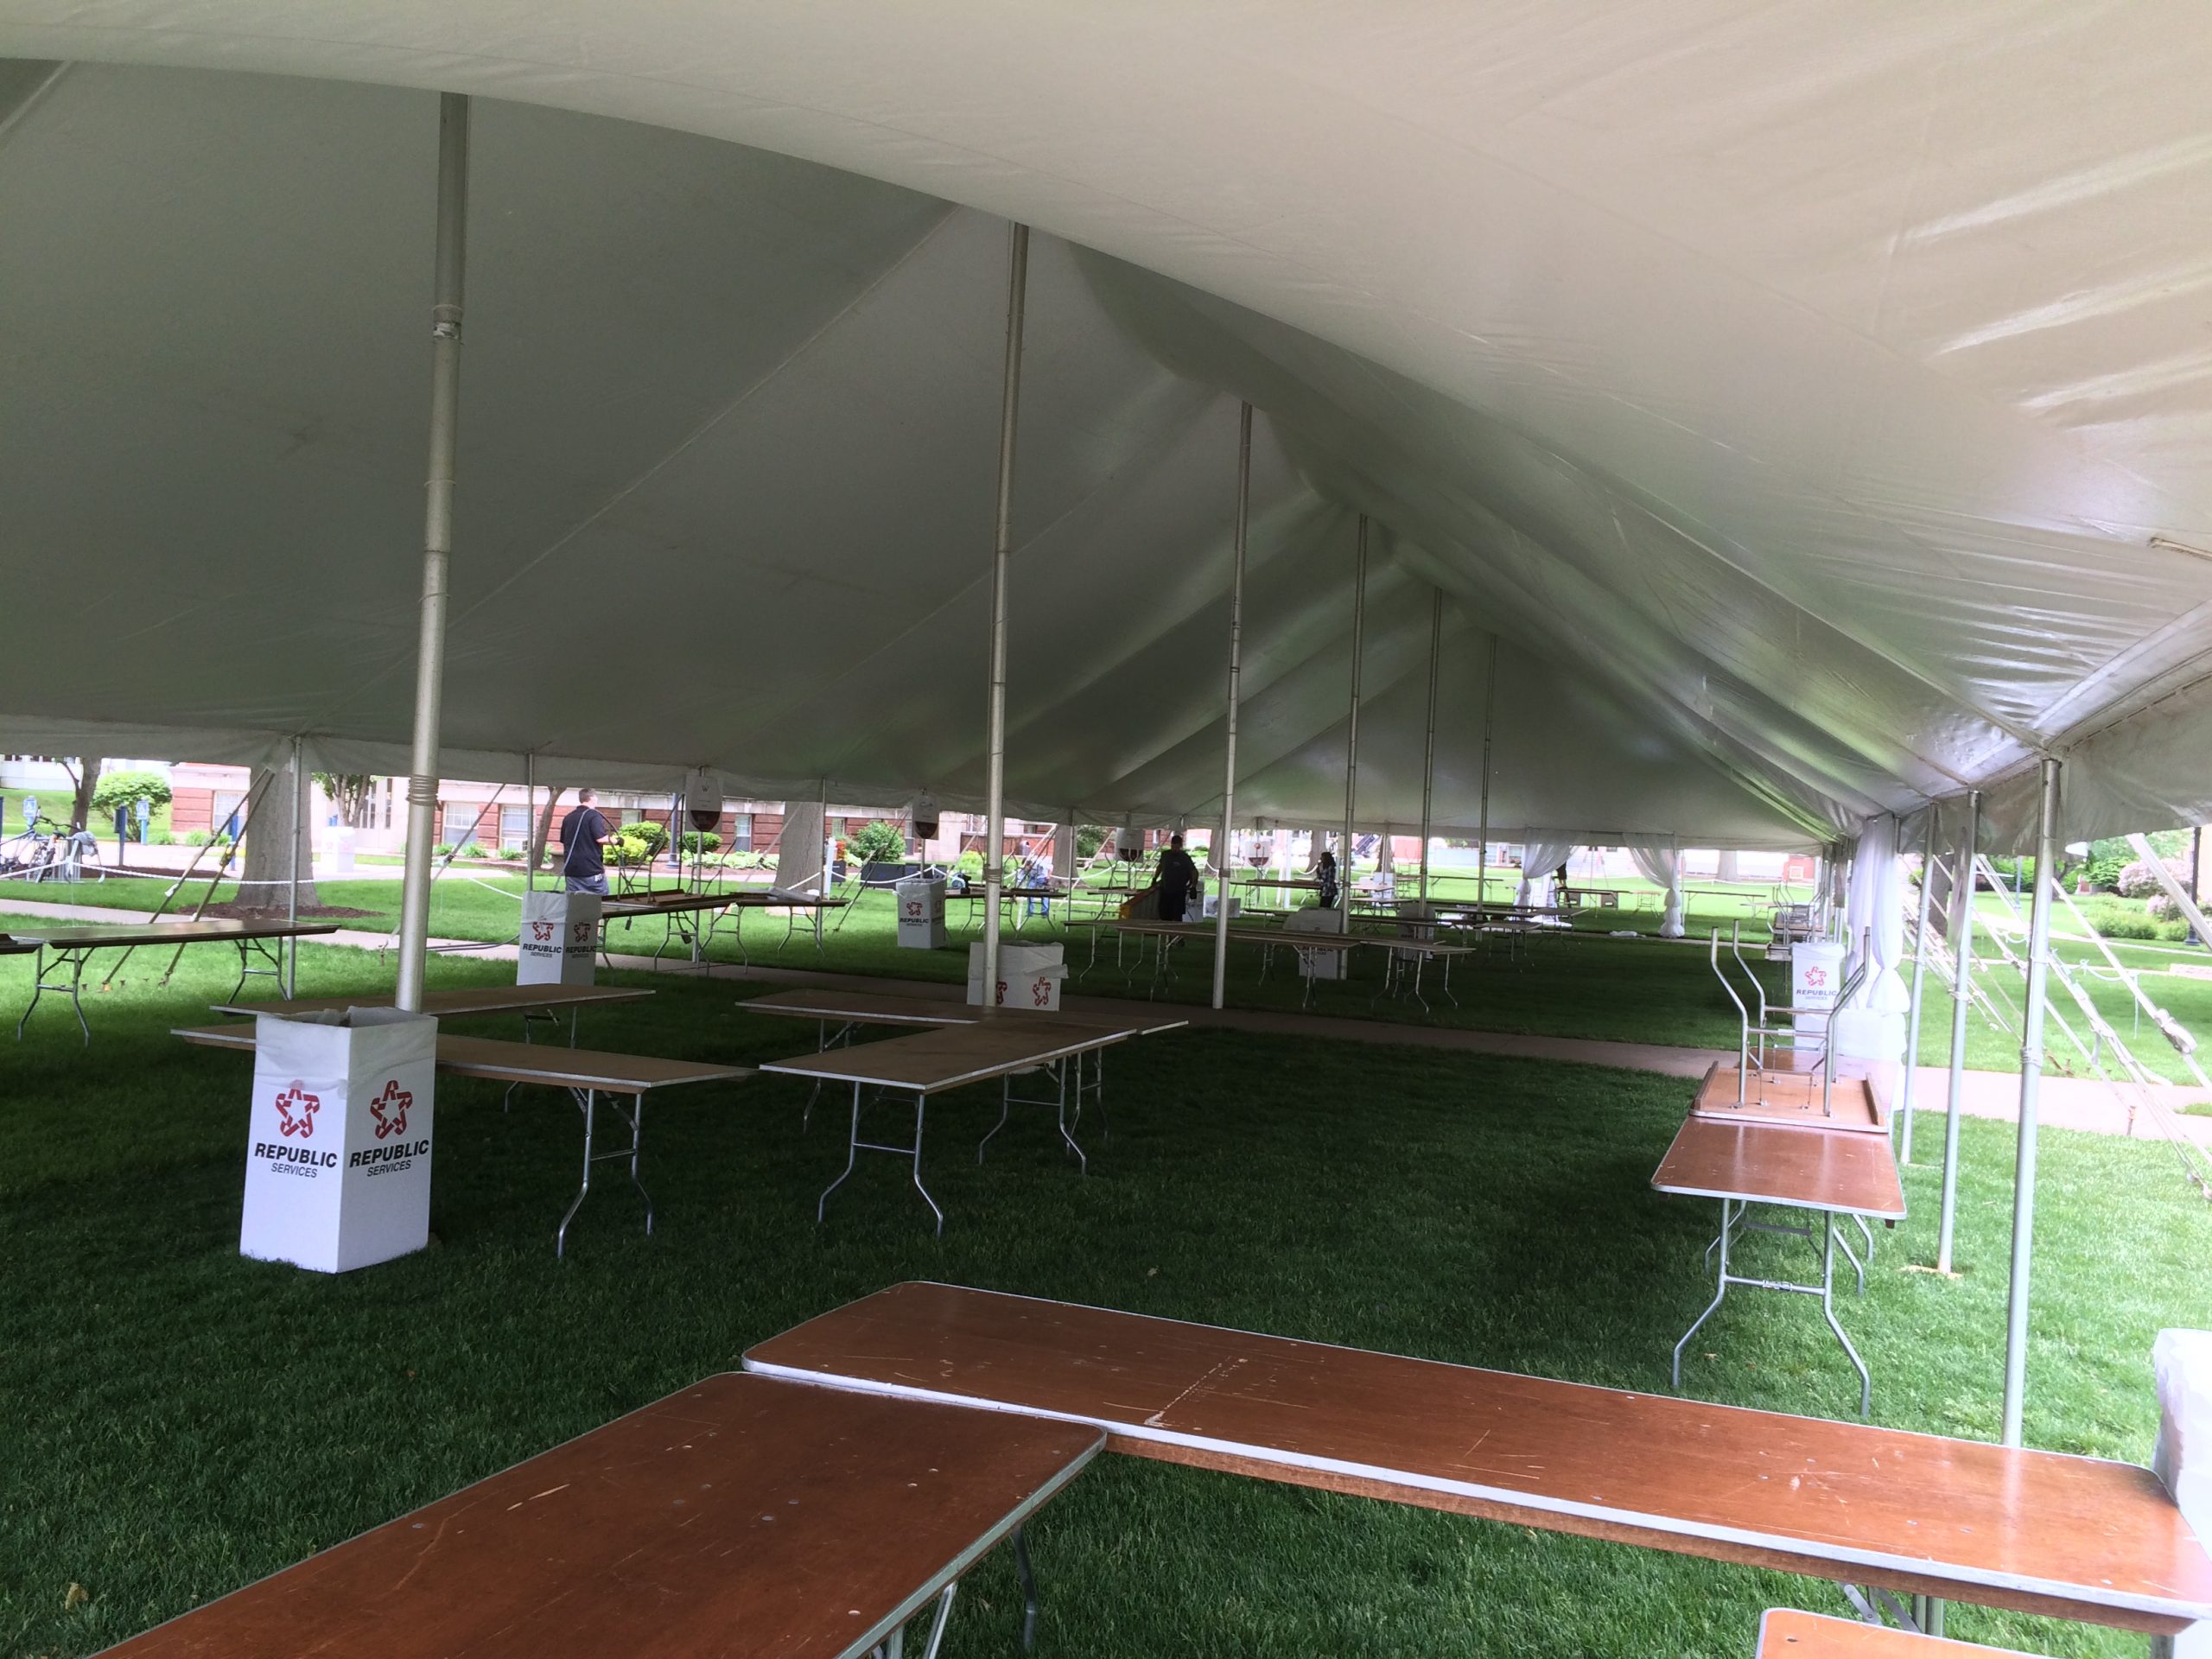 Under the 40' x 140' Rope and Pole tent in Davenport, IA, for a Wine Festival/Wine Tasting event.